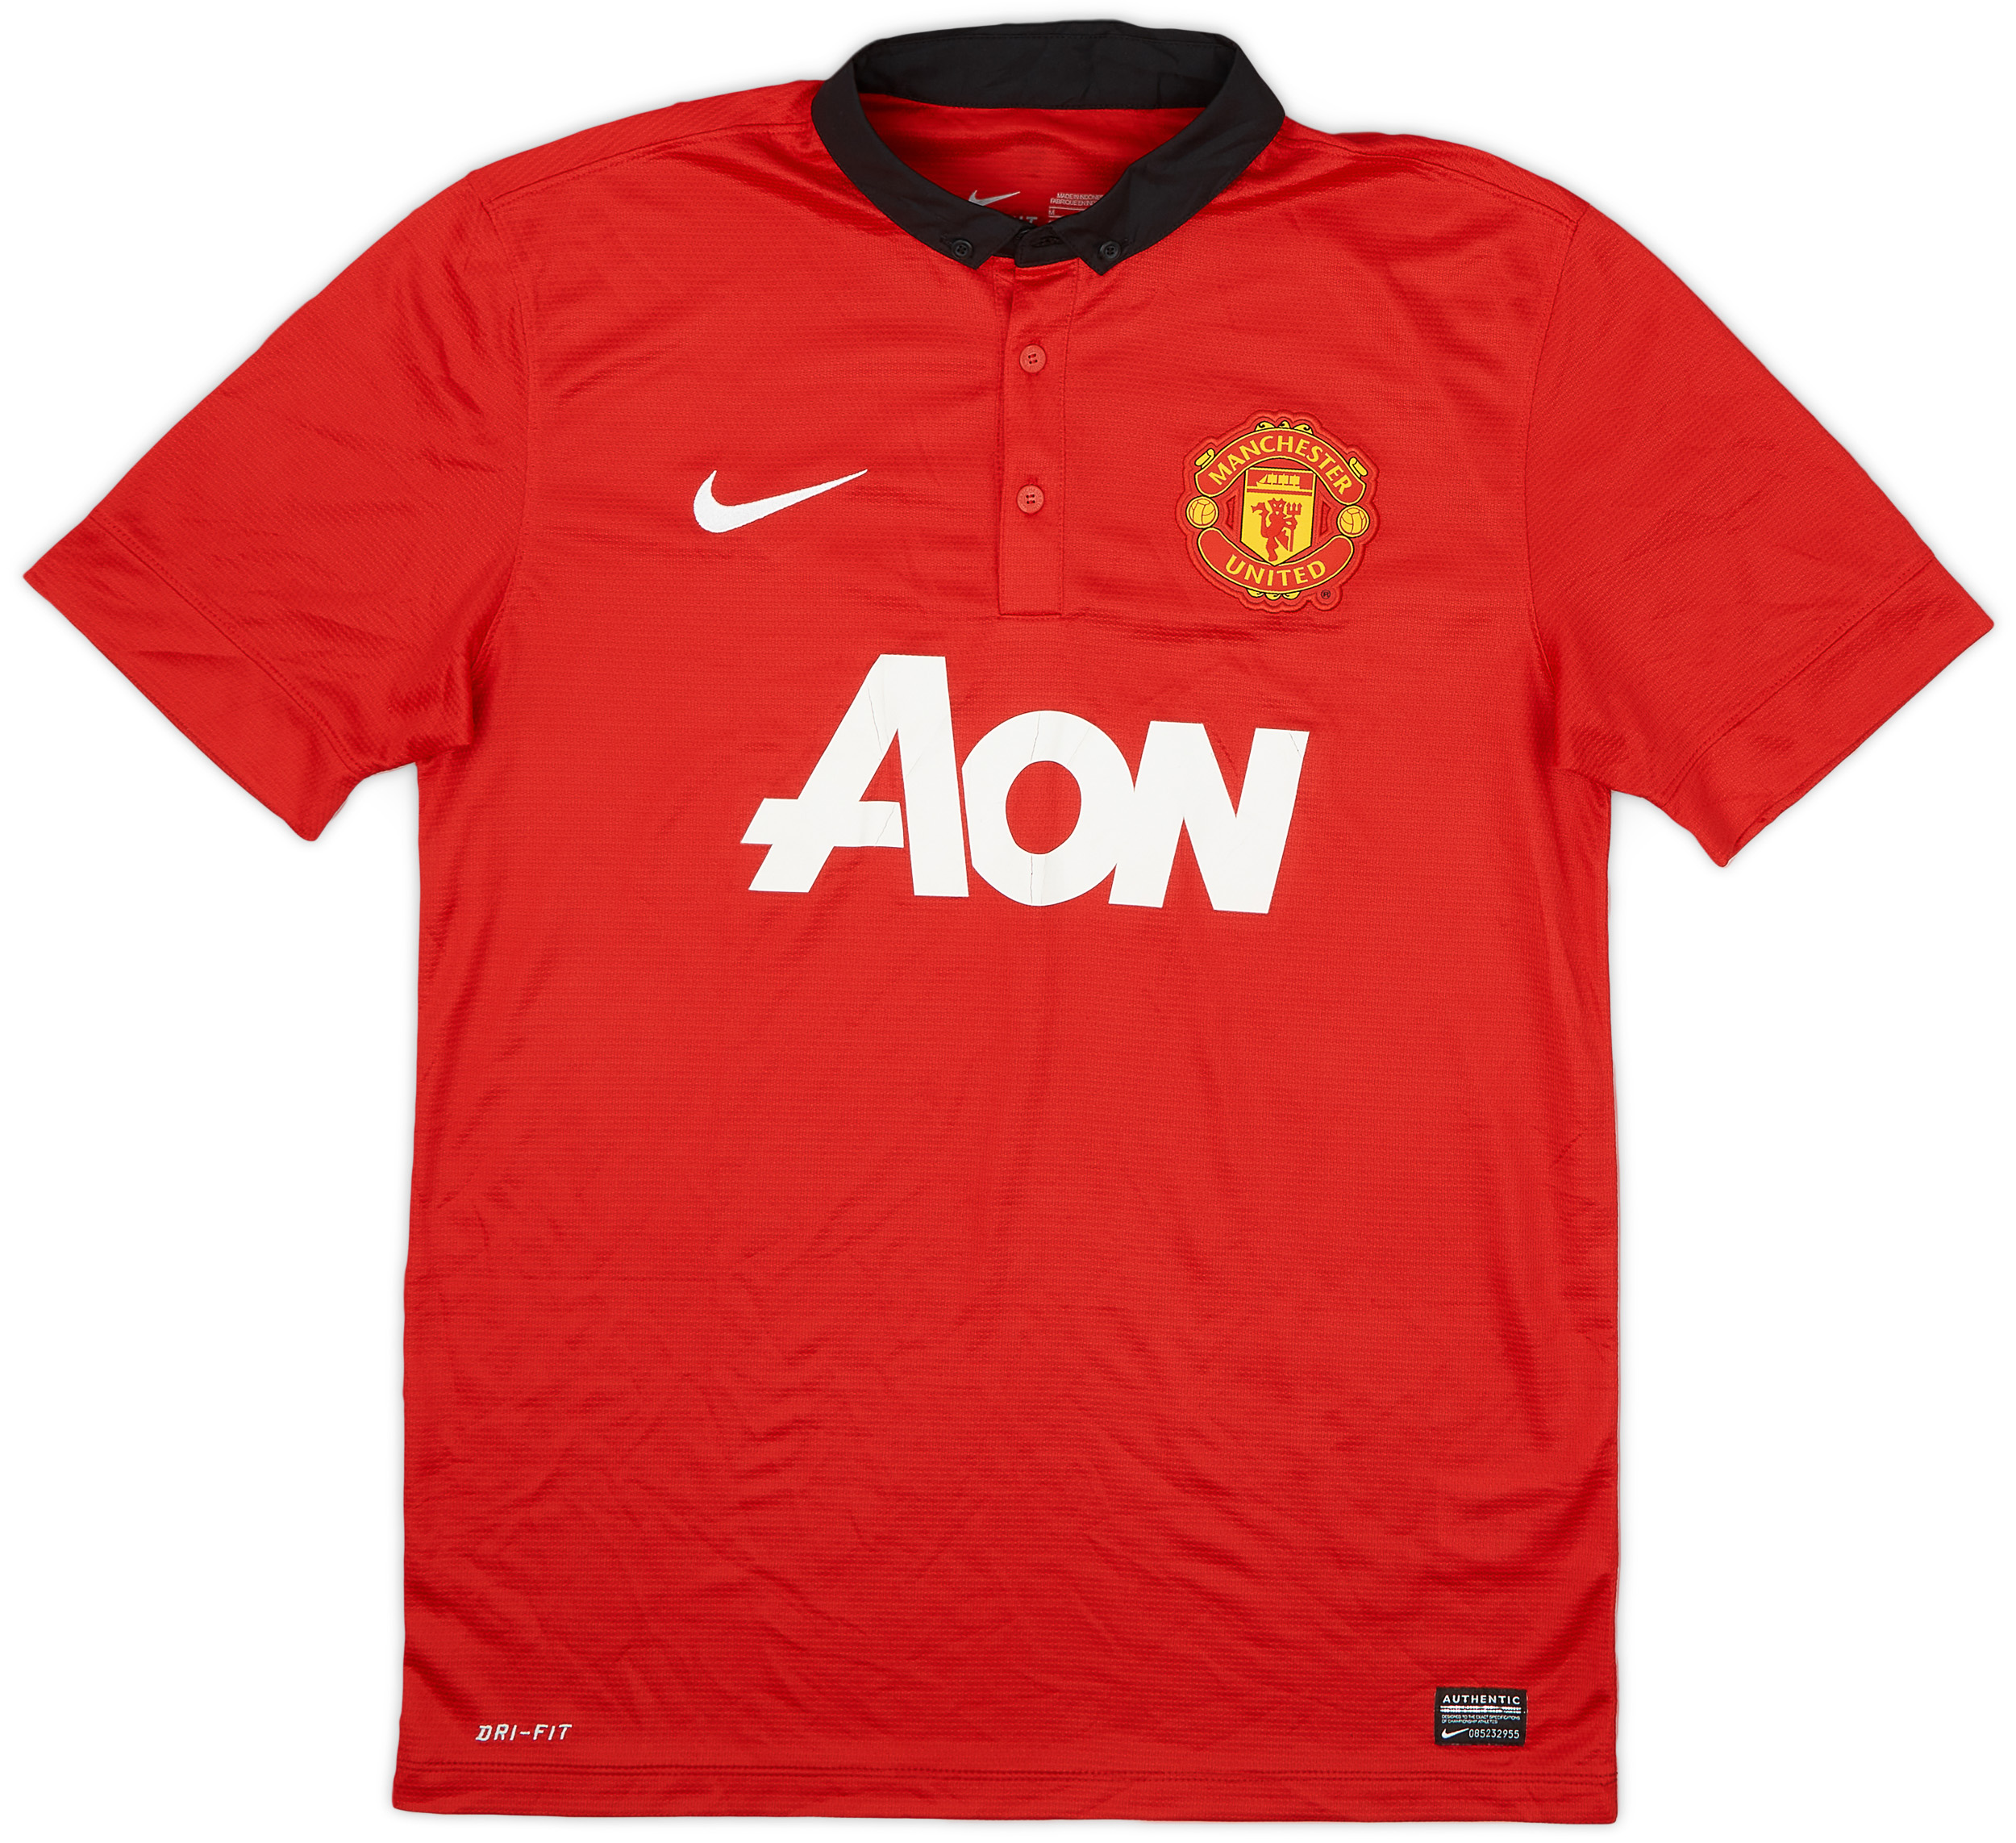 2013-14 Manchester United Home Shirt - 6/10 - ()